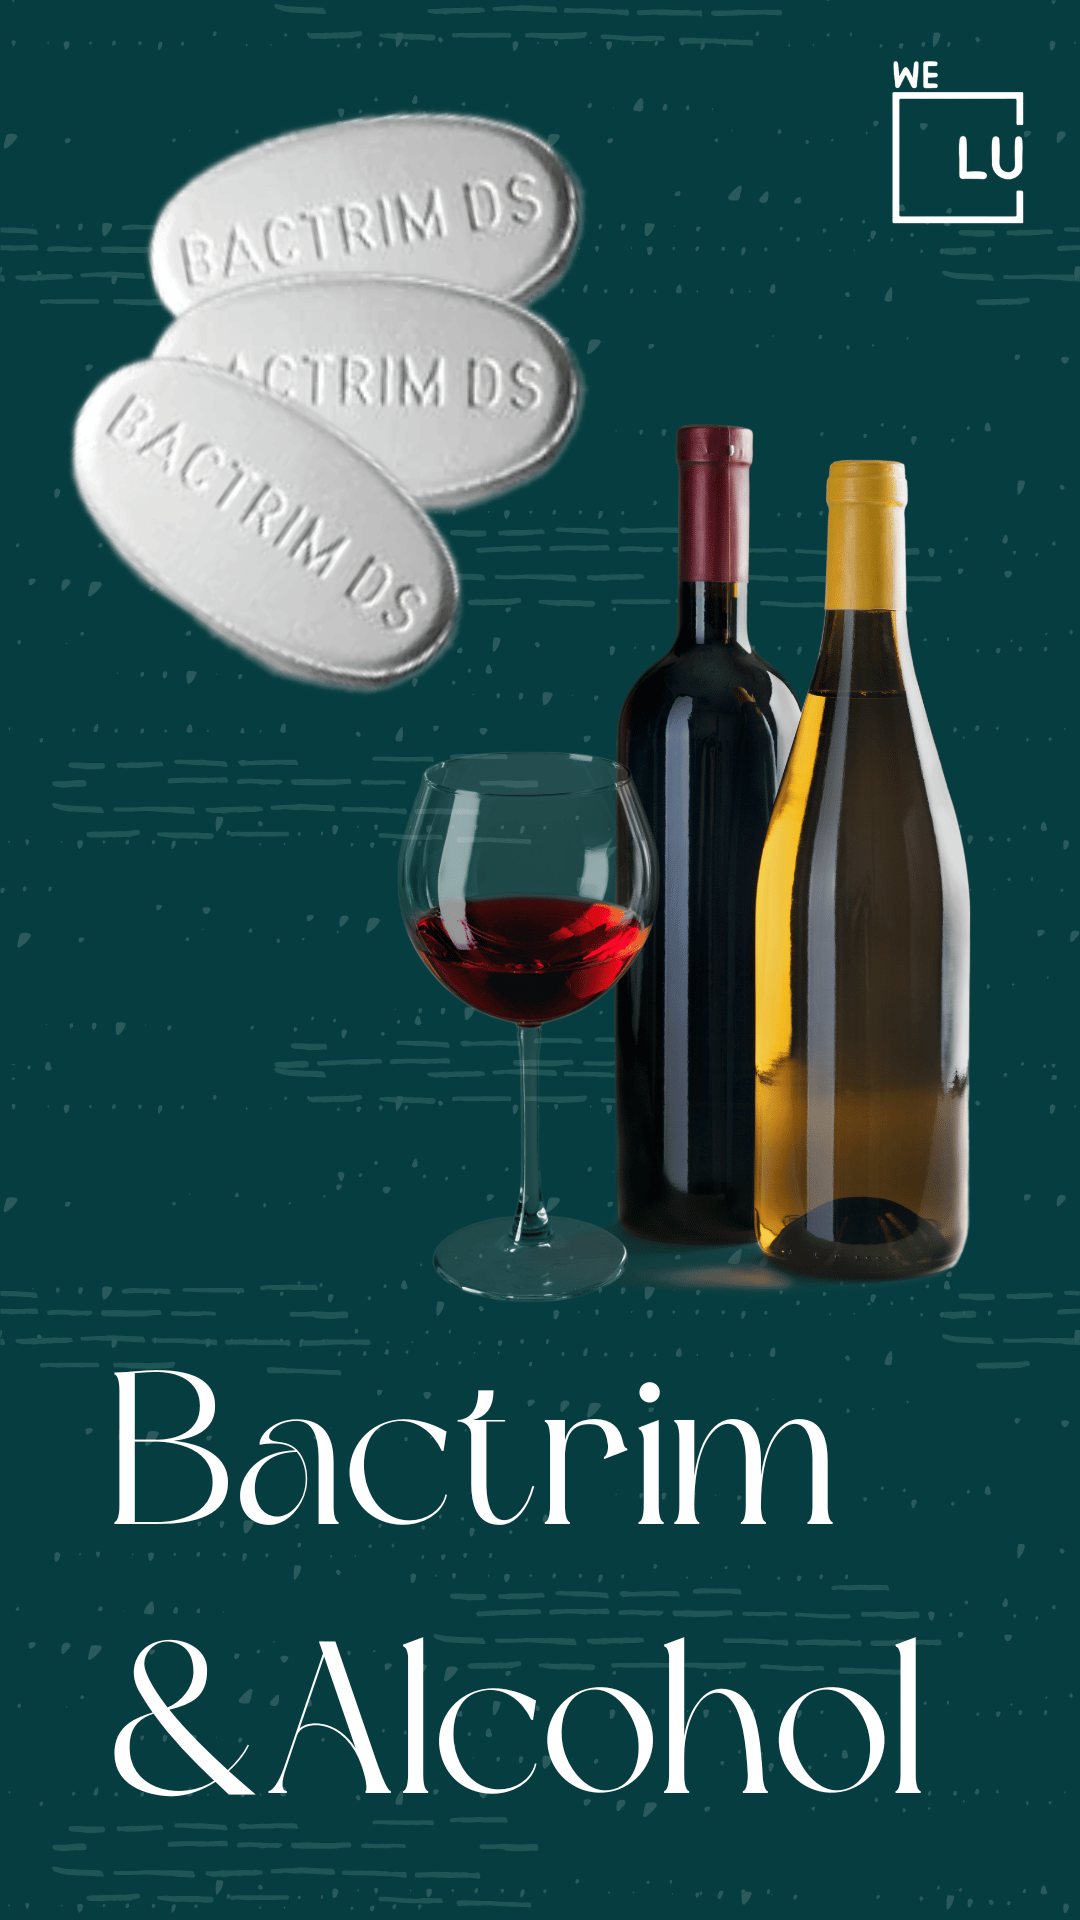 Bactrim and Alcohol Side Effects. Alcohol and Bactrim Warnings. Bactrim and Alcohol Interaction. Bactrim Alcohol Reactions. & Can You Drink Alcohol While Taking Bactrim?